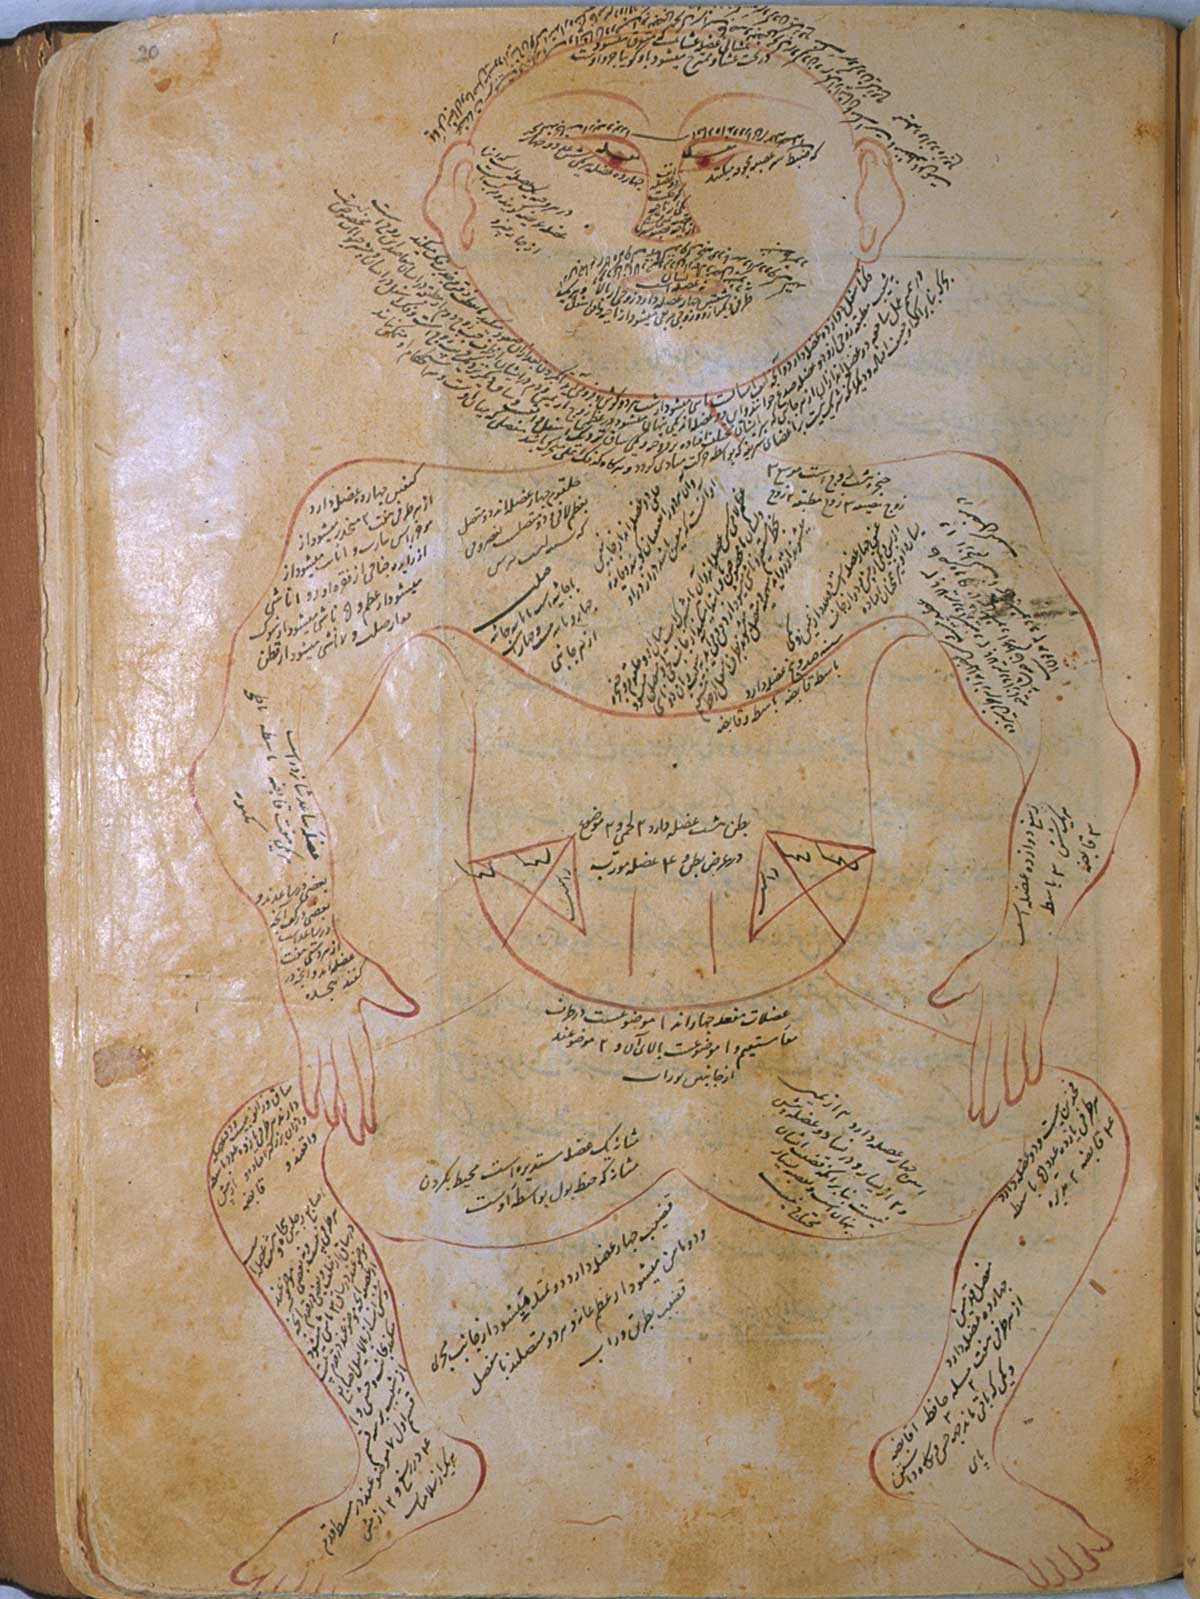 Folio 20a of Mansur ibn Ilyas' Tashrih-i badan-i insan, featuring a muscle figure, shown frontally, with extensive captions describing the muscles.